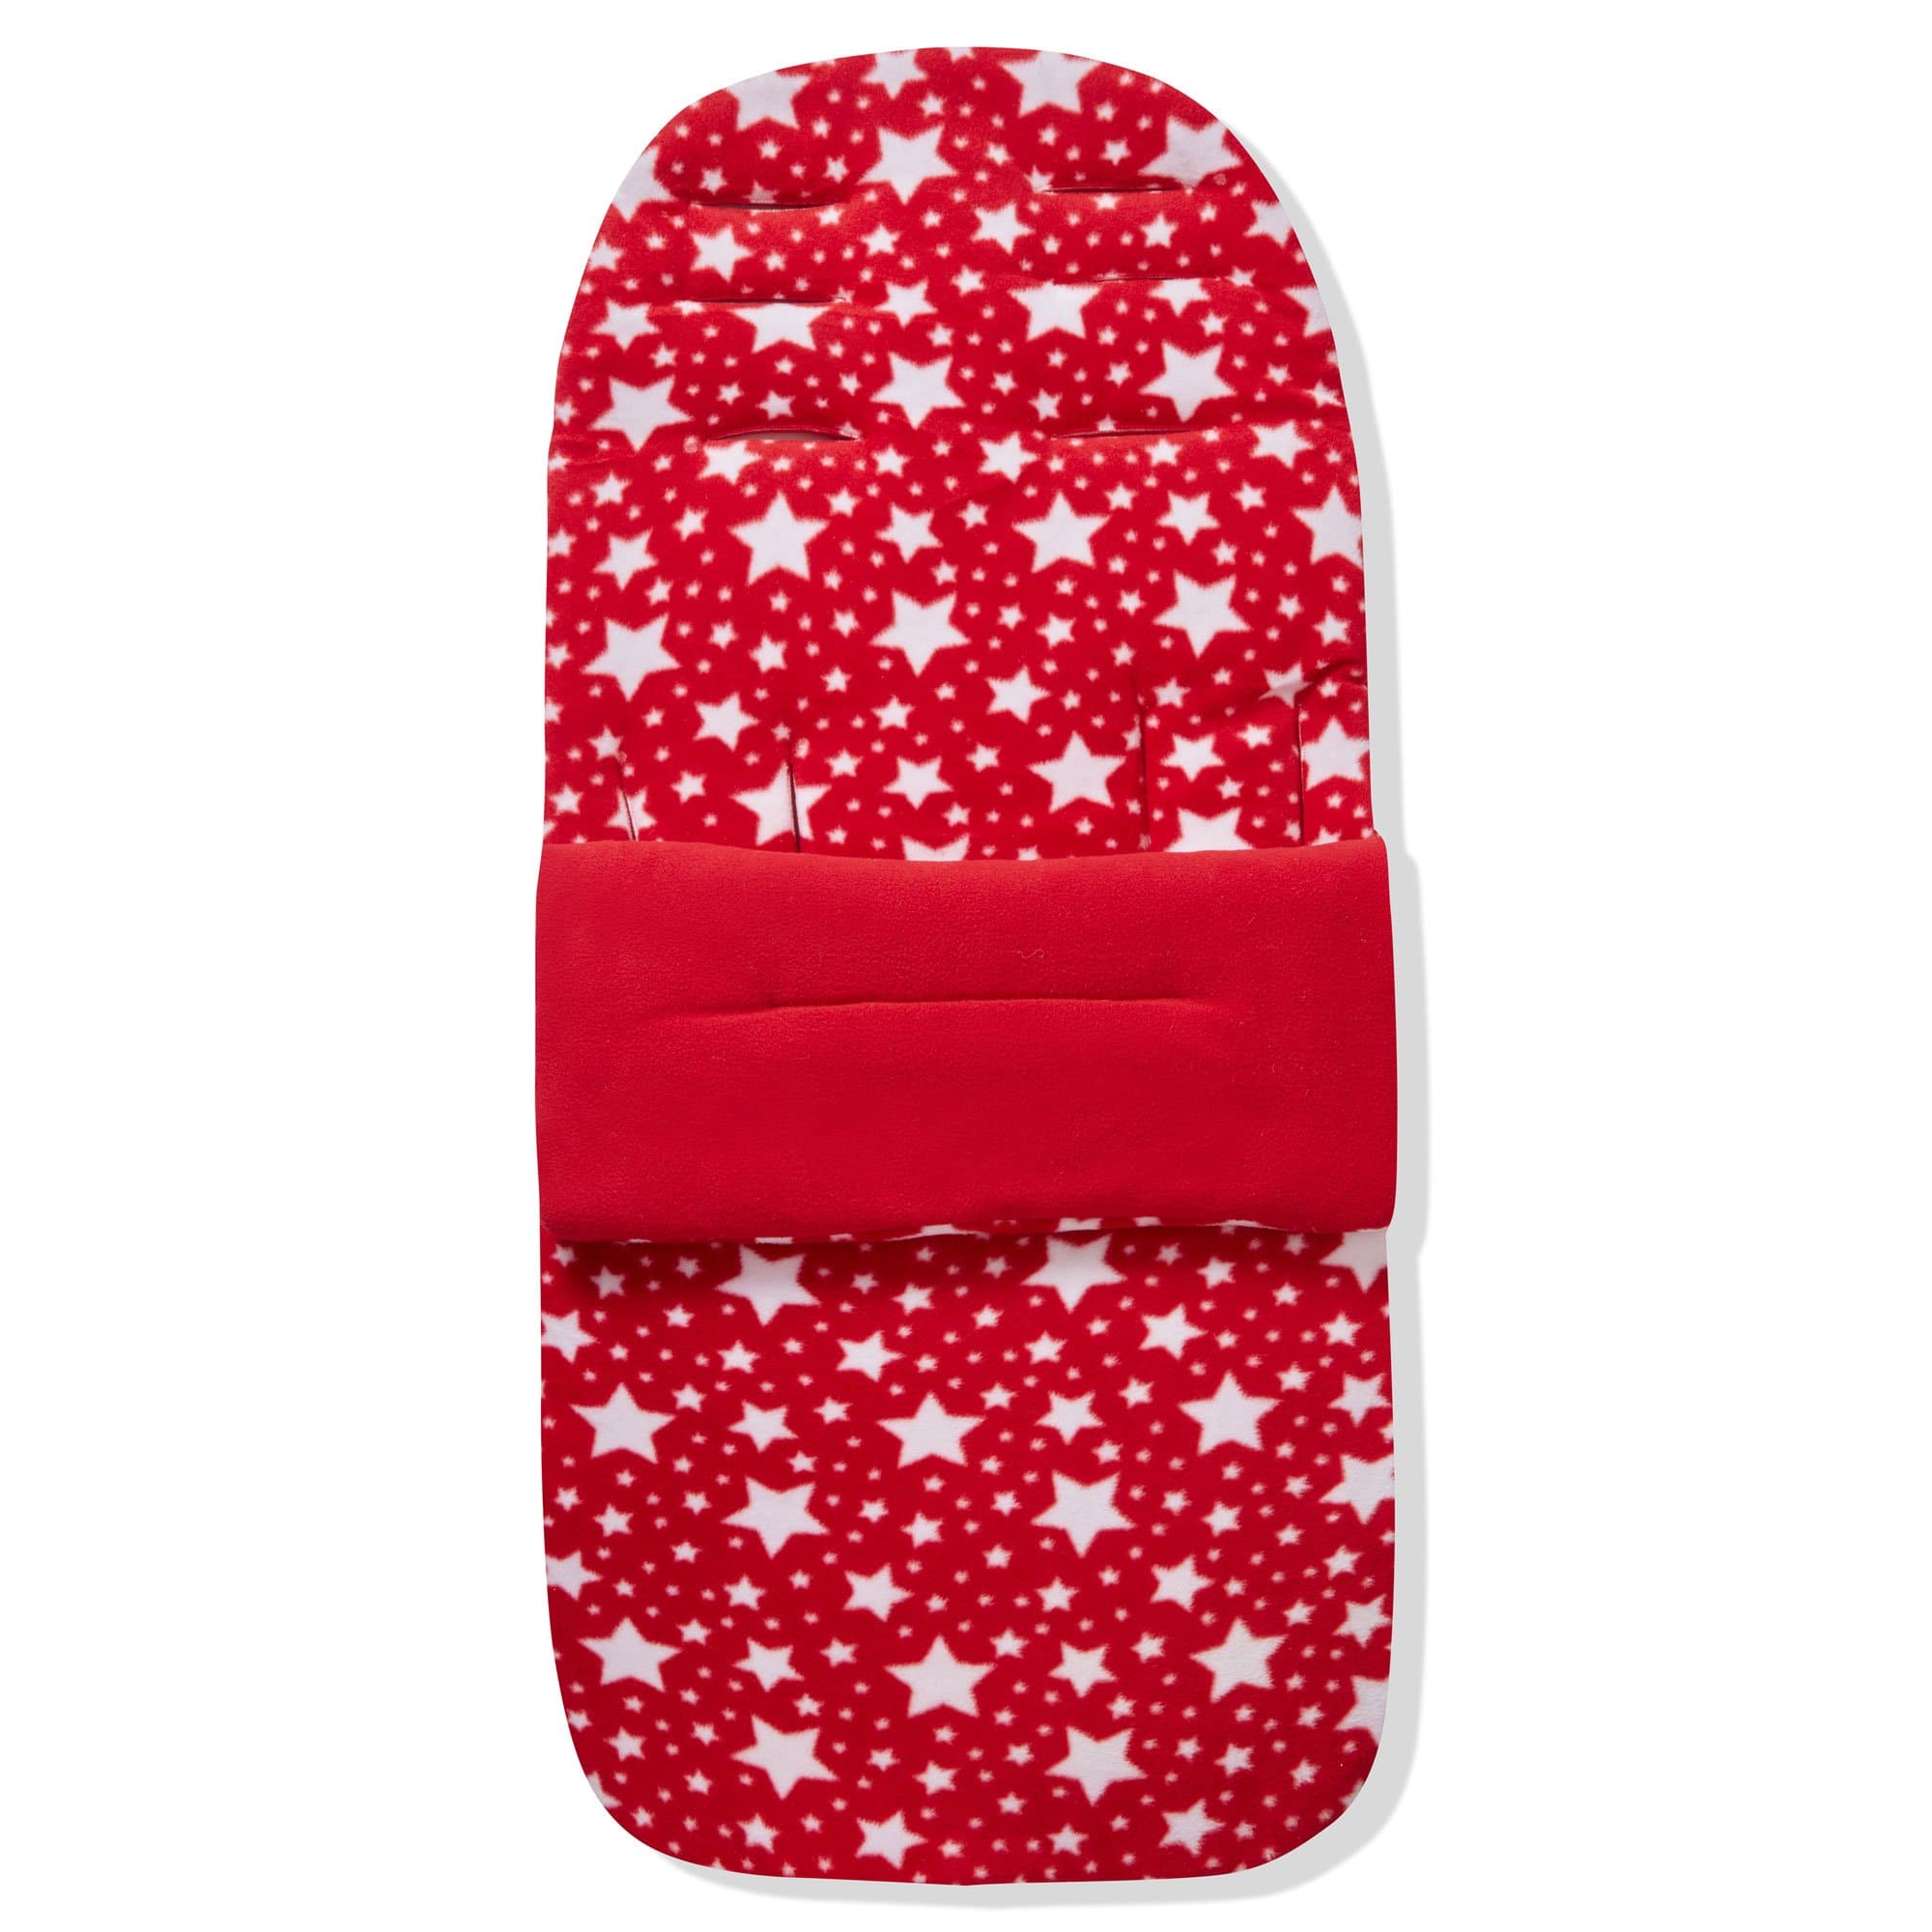 Fleece Footmuff / Cosy Toes Compatible with XTS - Red Star / Fits All Models | For Your Little One